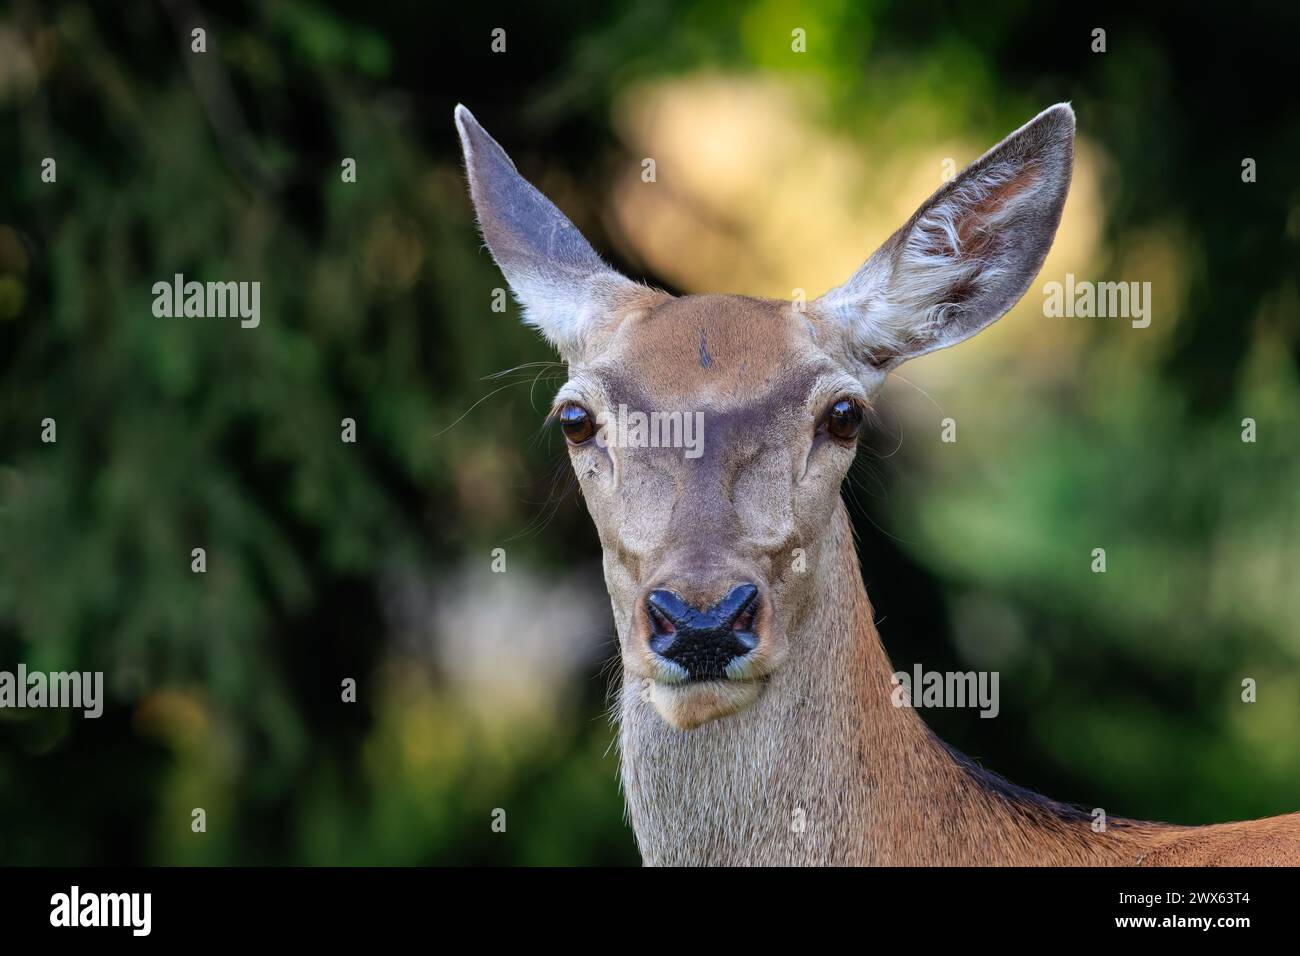 Close-up headshot of red deer doe (cervus elaphus).Her gentle eyes reflect a sense of serenity and wisdom, while her delicate ears stand attentively Stock Photo